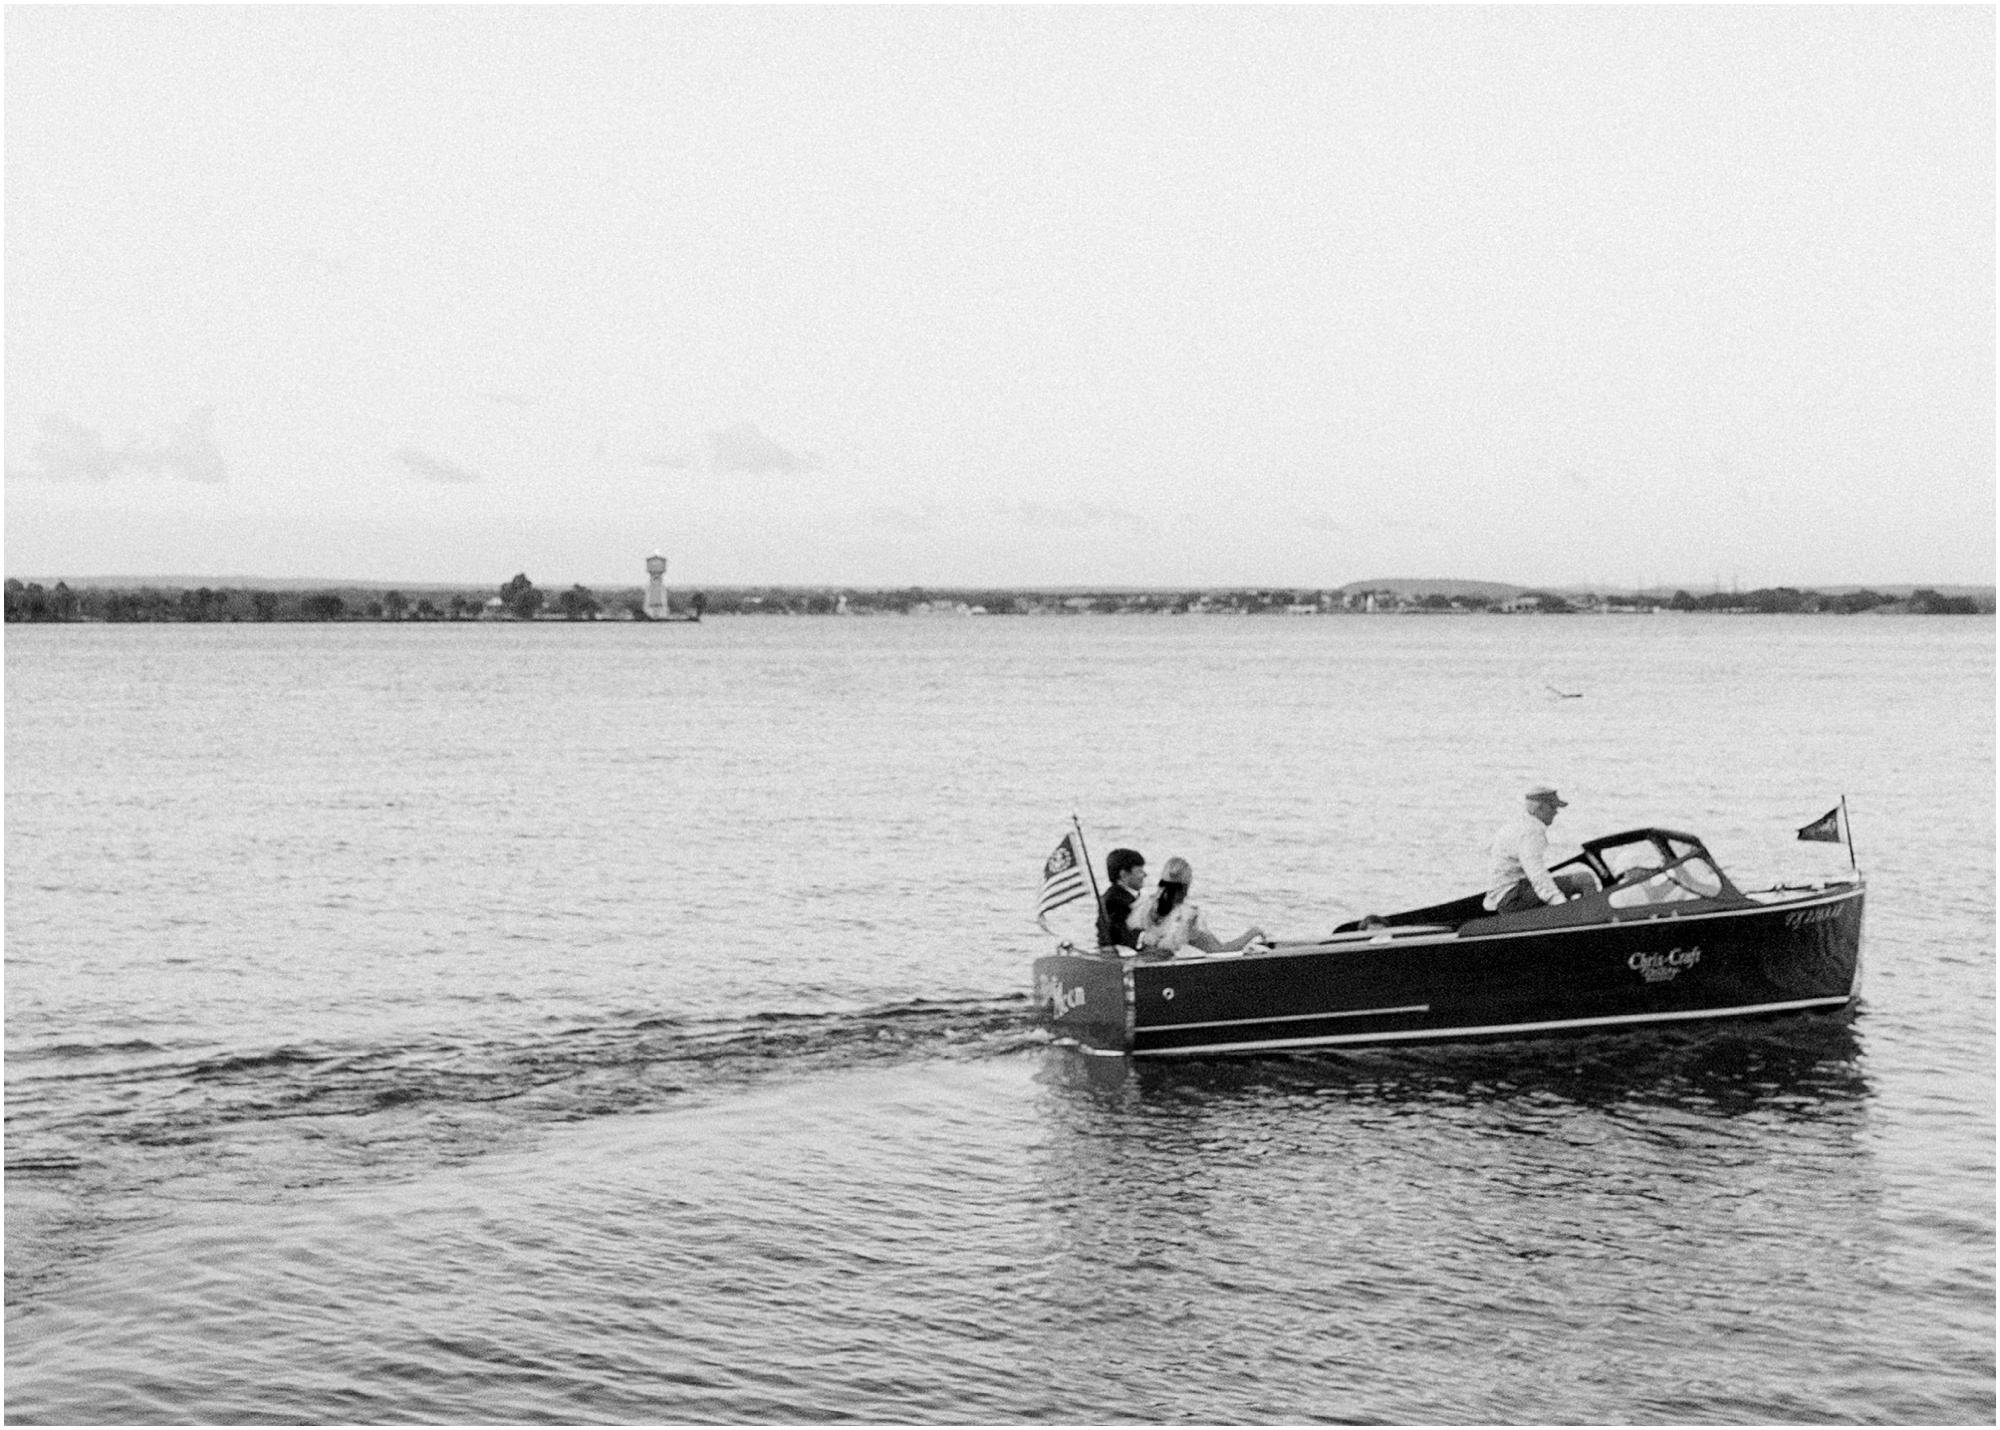 Bride and groom riding a boat to their wedding reception in black and white